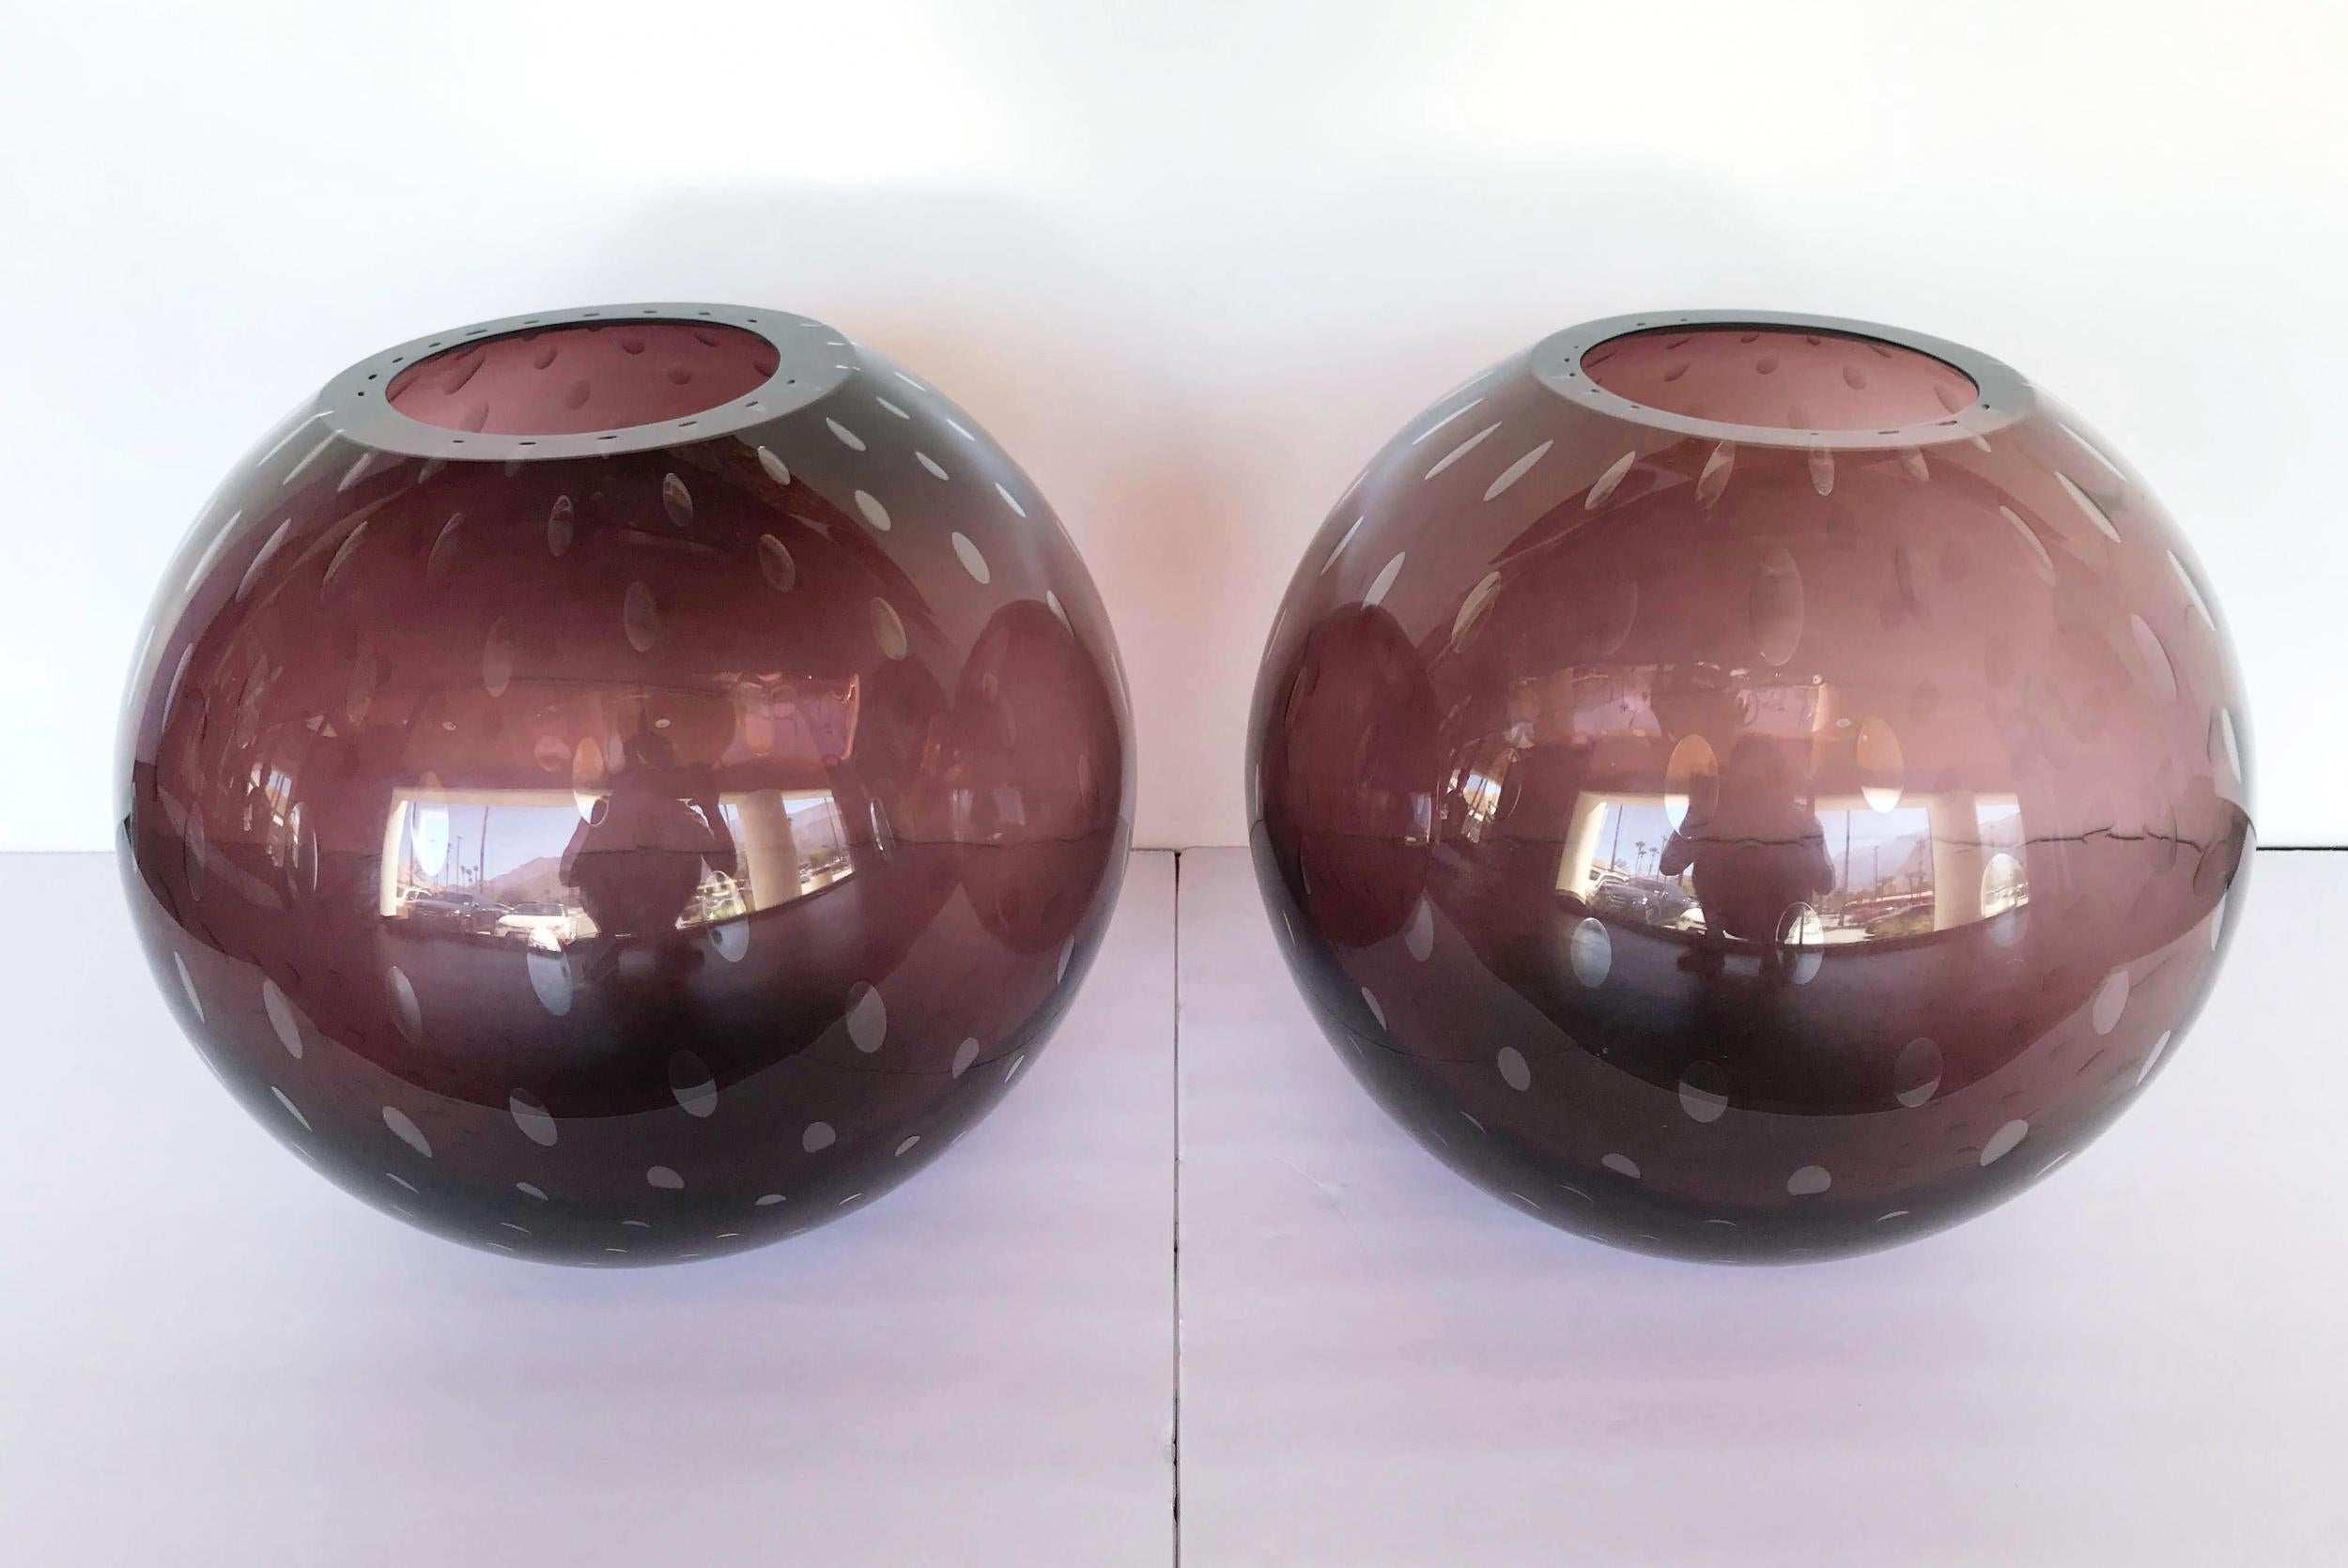 Pair of two signed Murano hand blown vases by Alberto Dona, 21st century.

Italian vases or sculptures in thick amethyst purple murano glass blown with bubbles inside the glass in Pulegoso technique by Alberto Dona Signature engraved on the base /